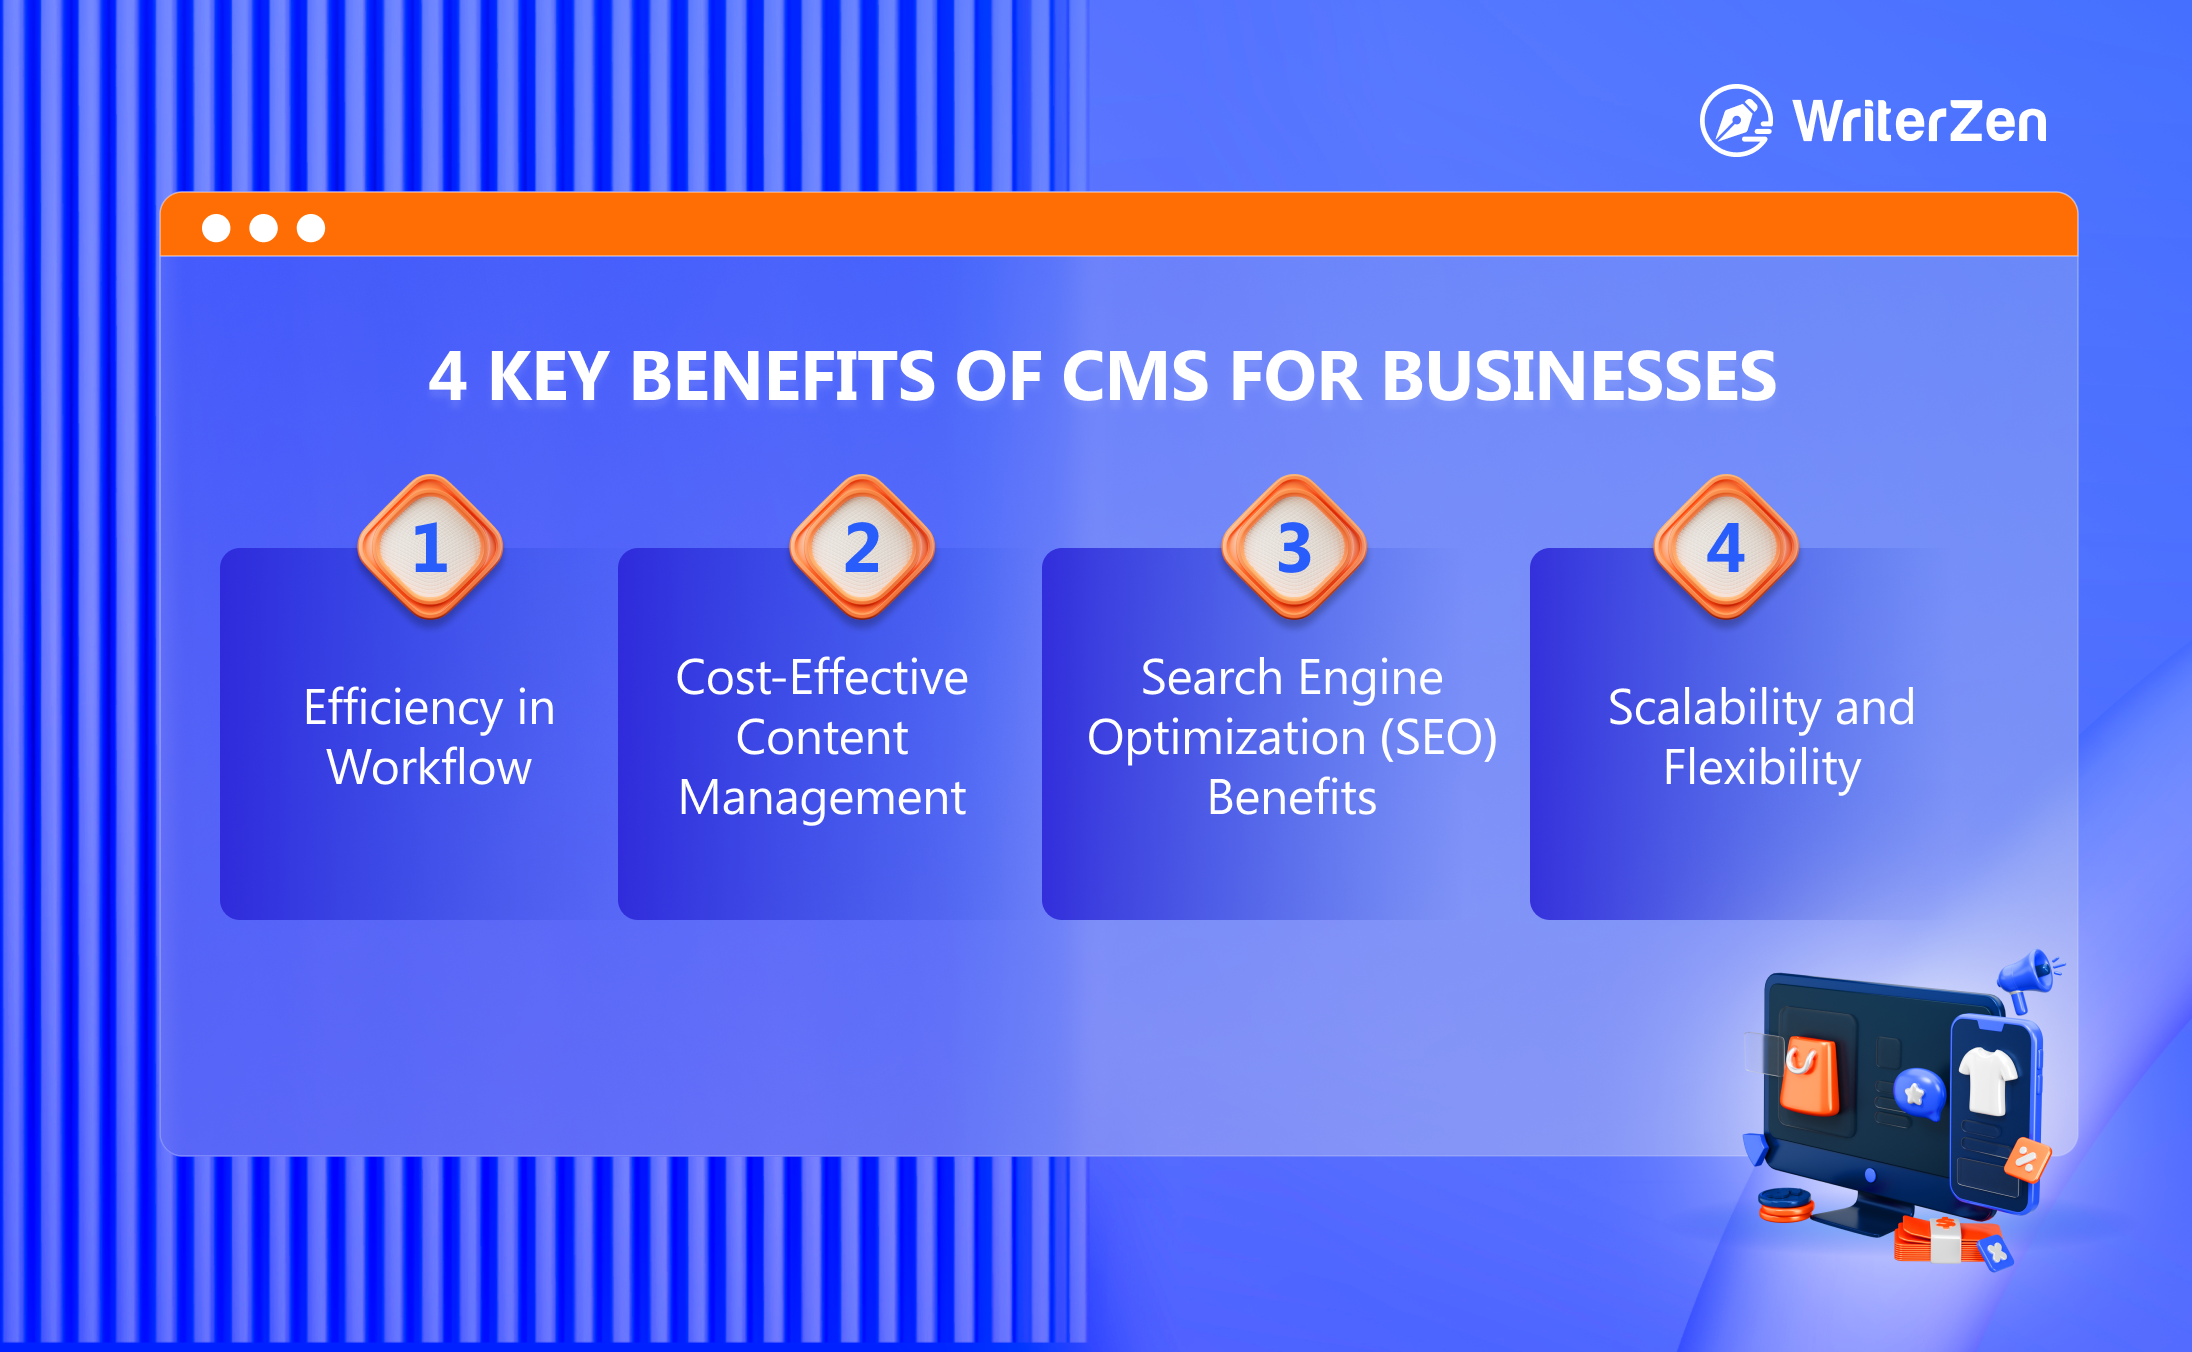 Four Key Benefits of CMS for Businesses